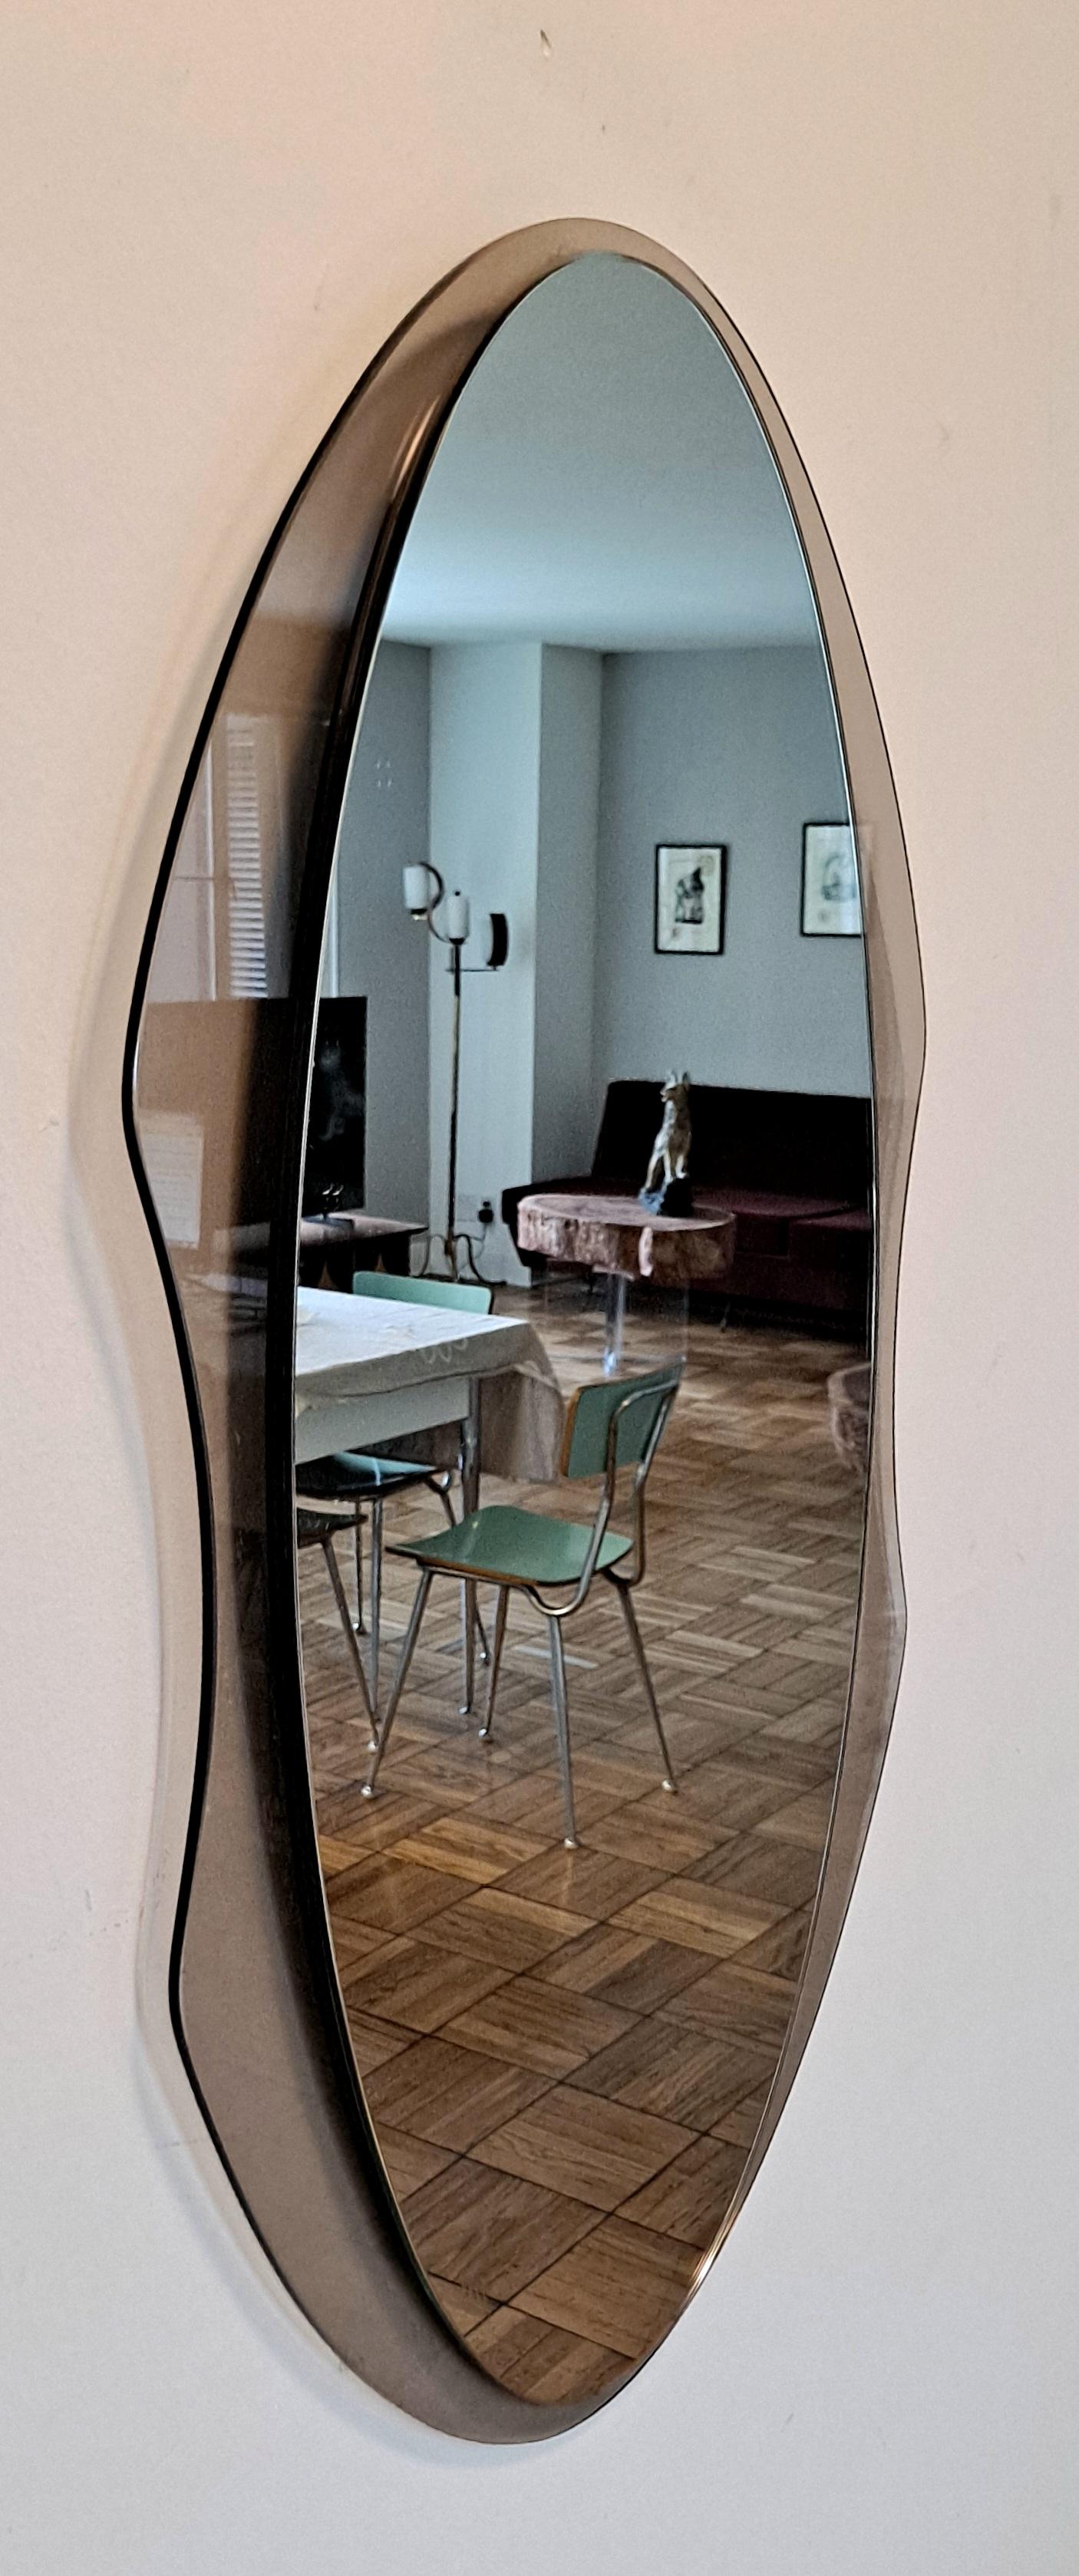 Italian mid century wall mirror by Cristal Arte .Miror is original condition and  the shape is special artistic work.